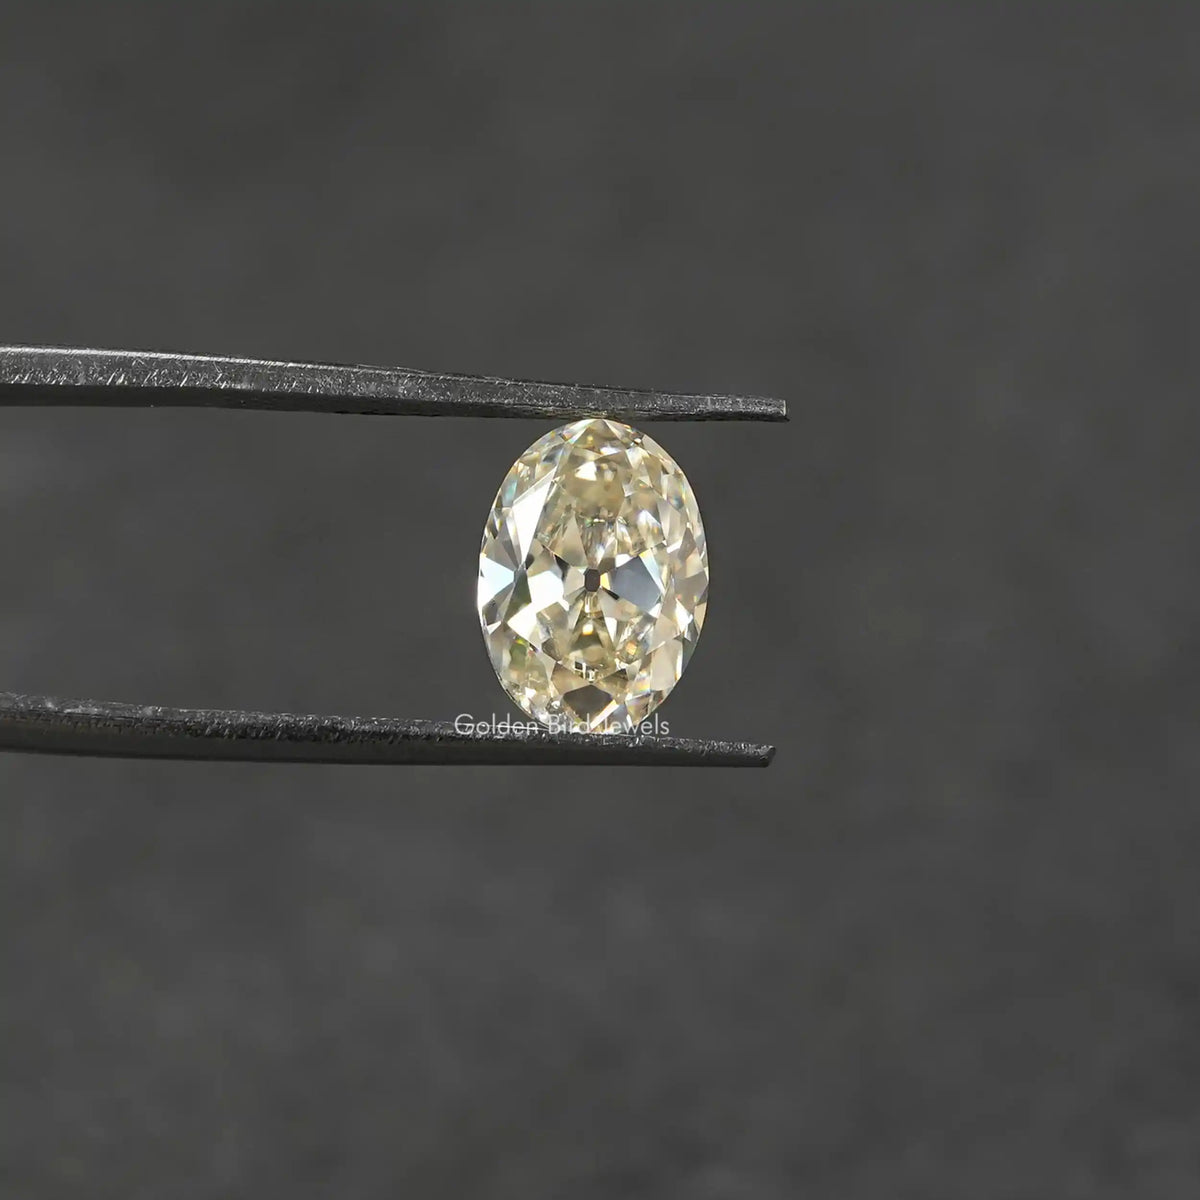 [In twizzer front view of oval cut loose moissanite]-[Golden Bird Jewels]